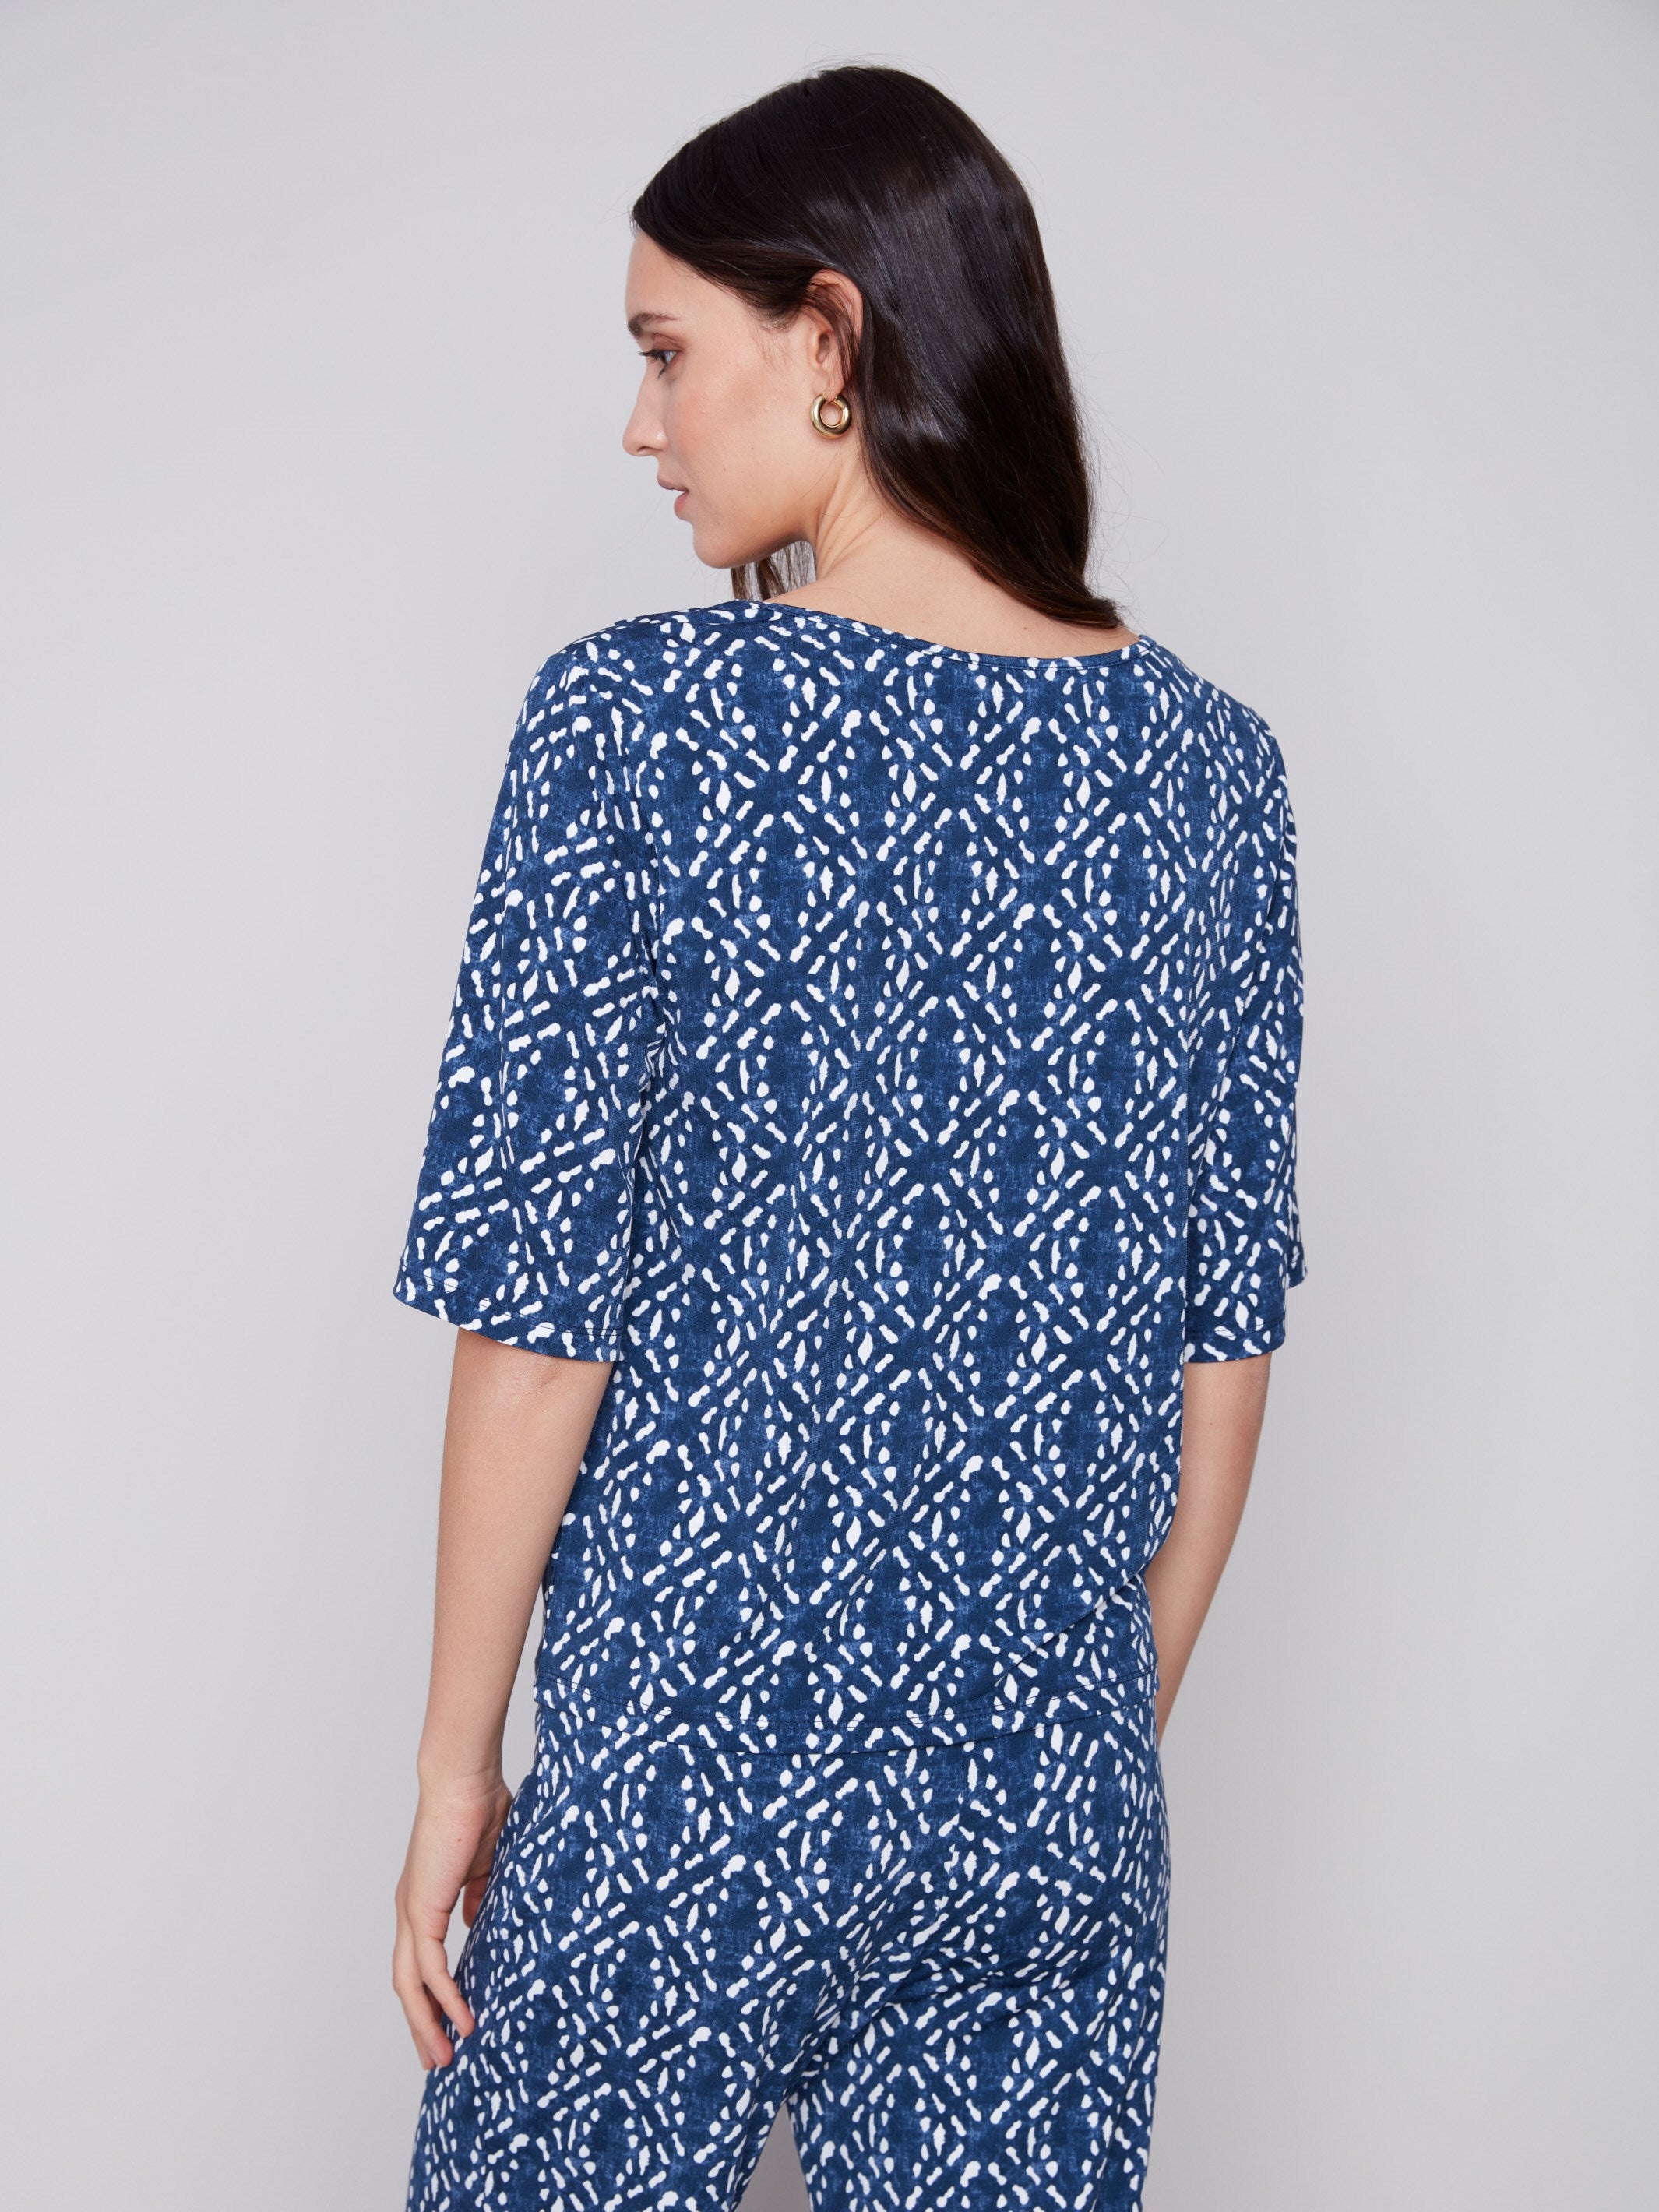 Short-Sleeved Printed Top with Front Knot - Indigo - Charlie B Collection Canada - Image 8